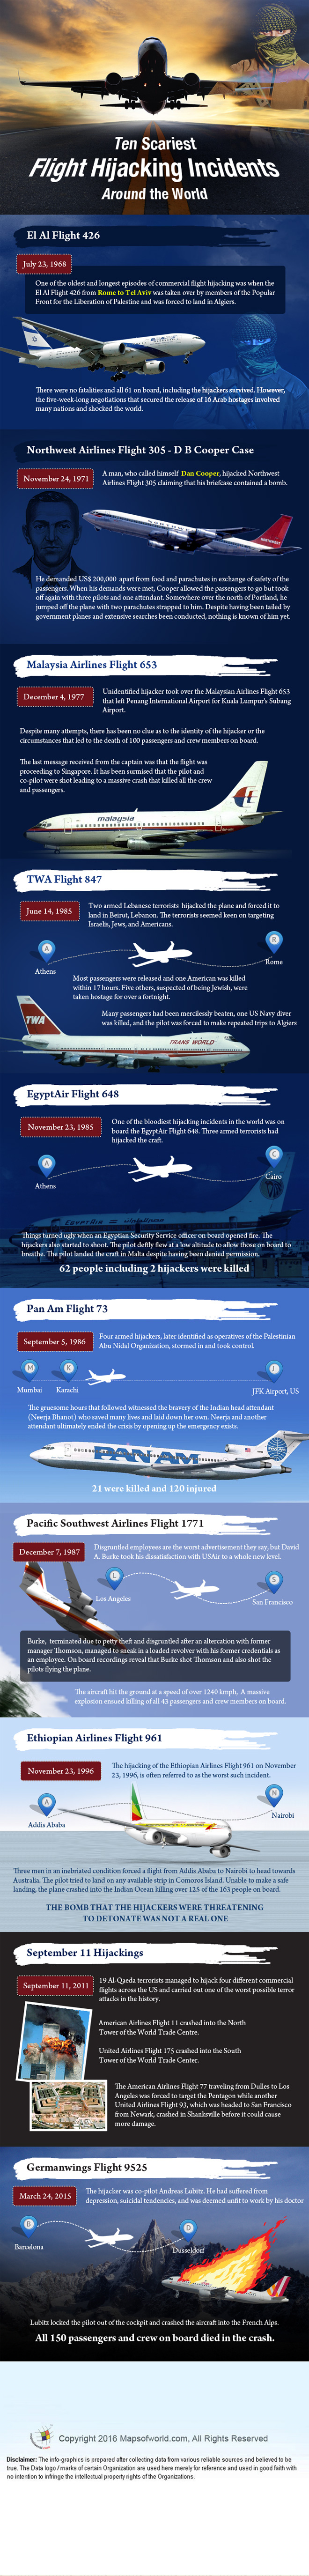 infographics-on-10-shocking-hijacking-incidents-from-across-the-world